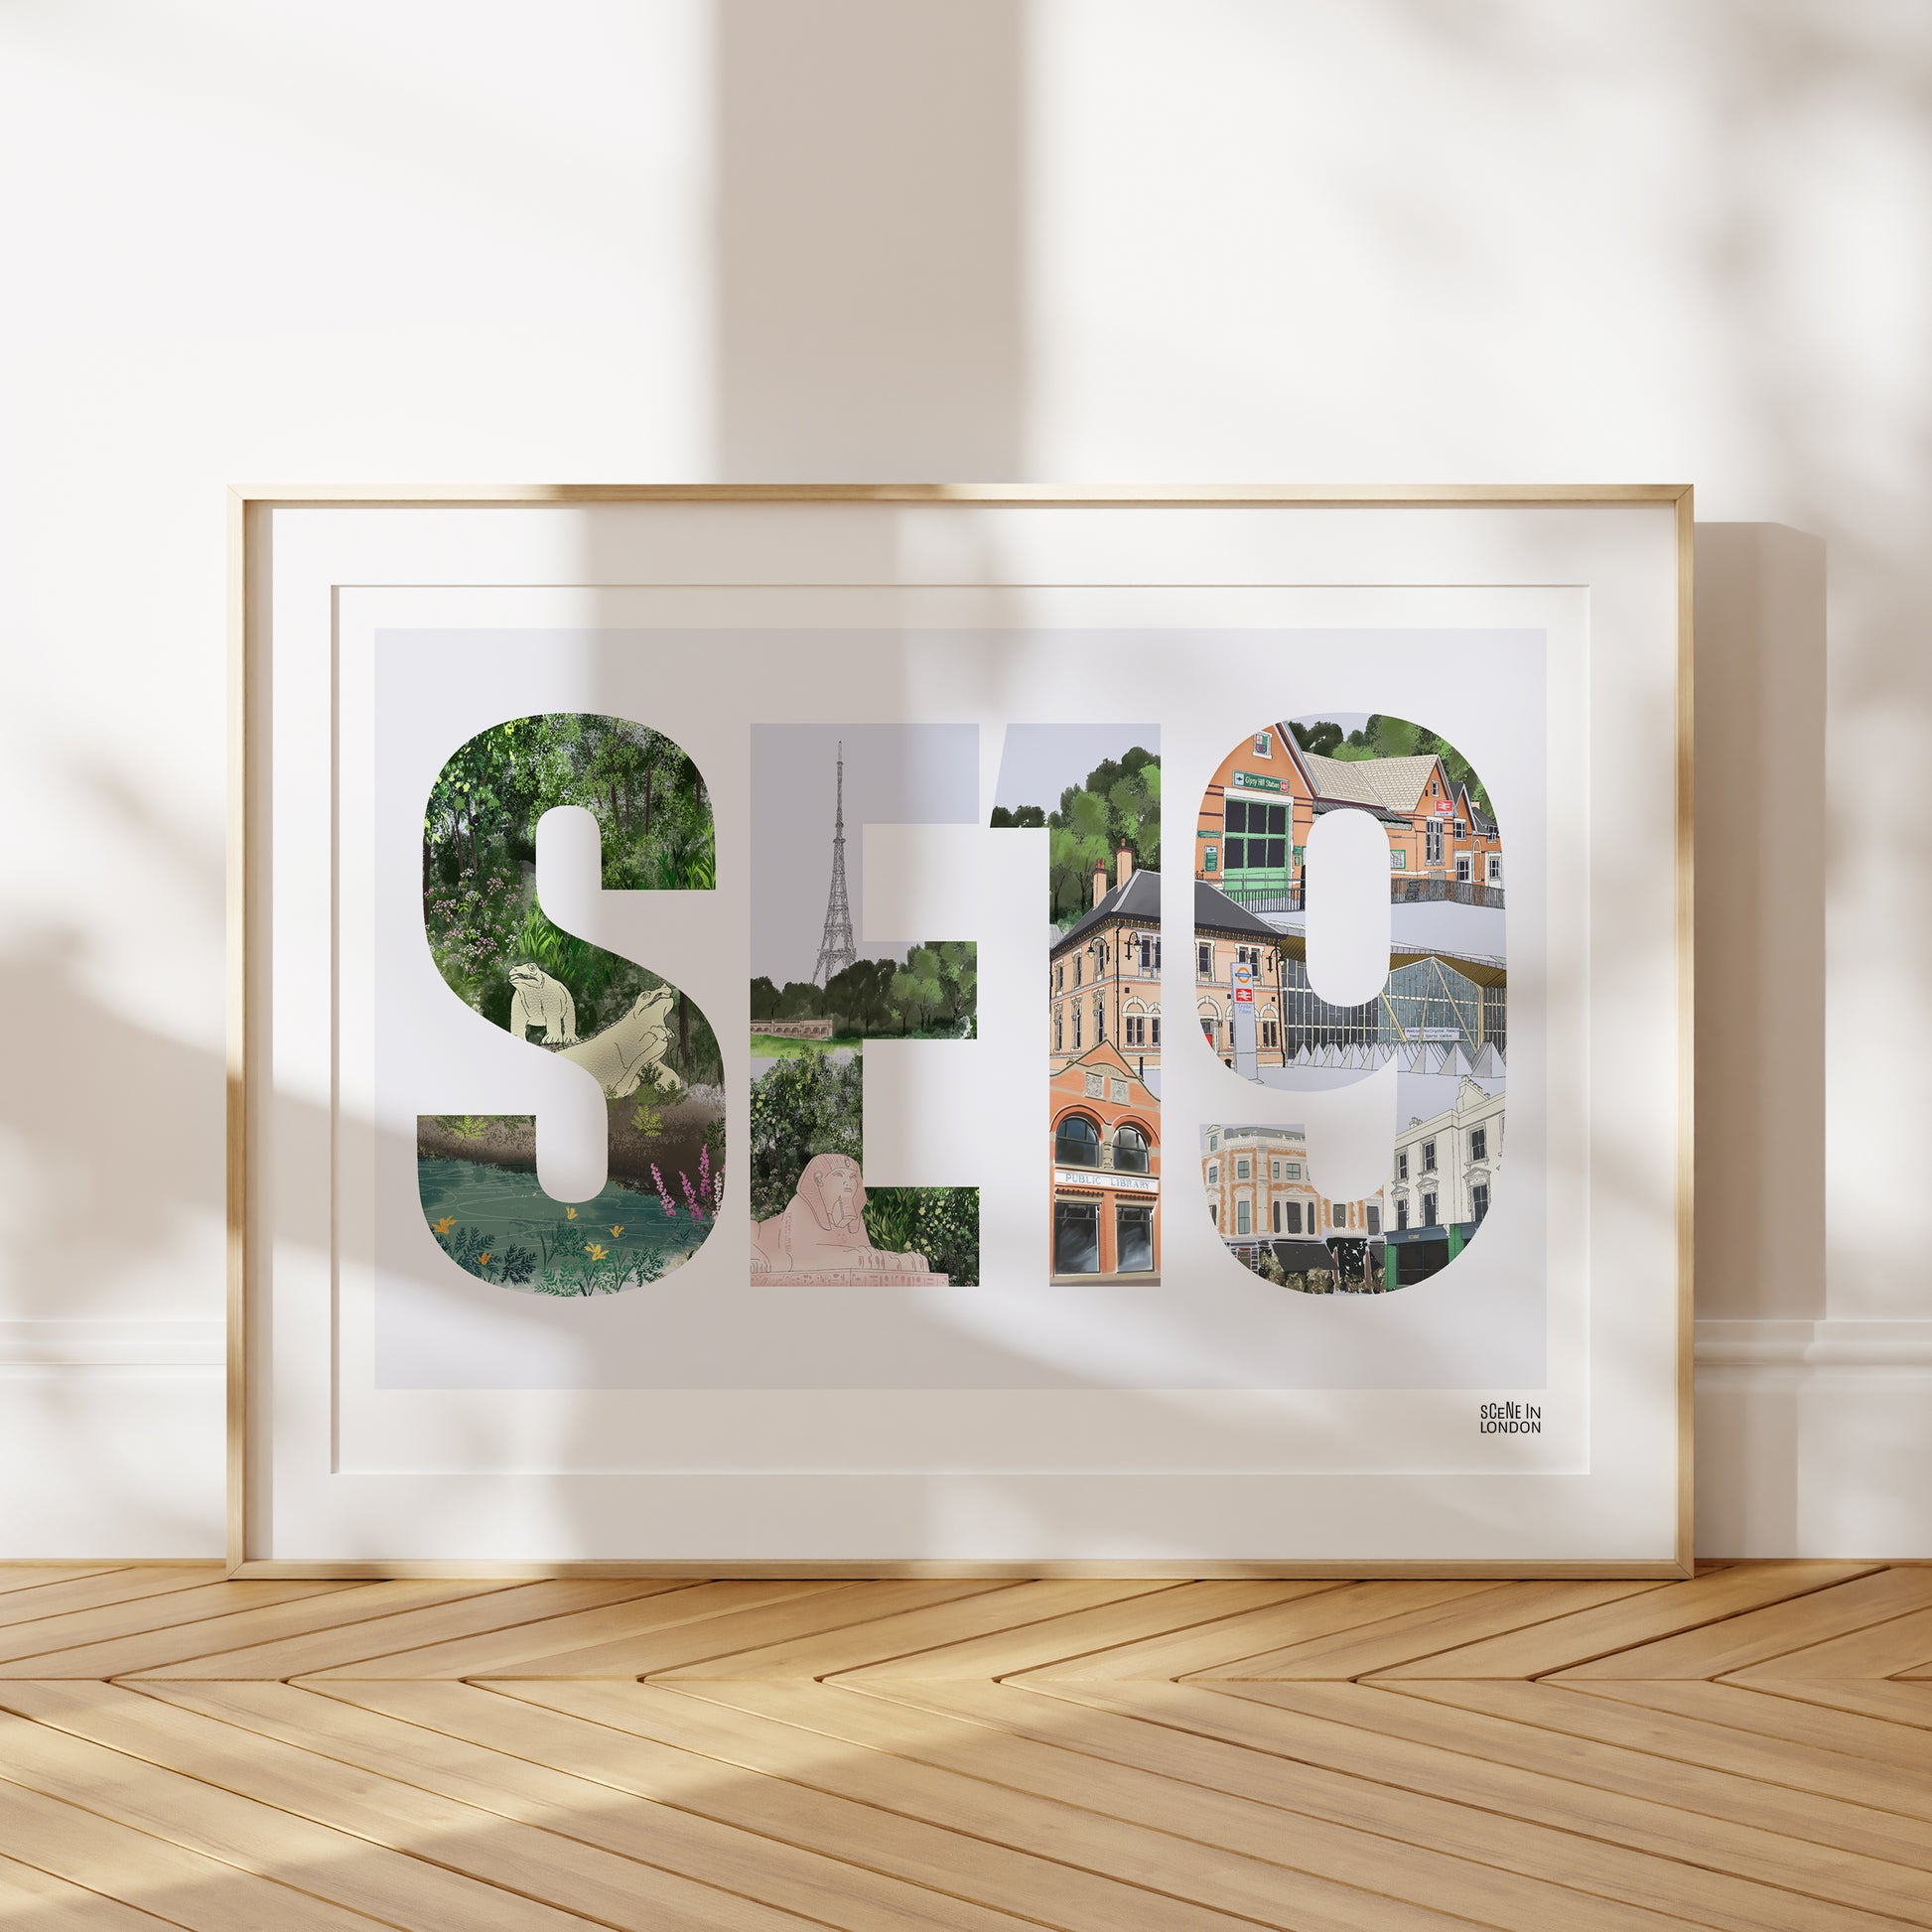 SE19 London Print featuring landmarks in Crystal Palace